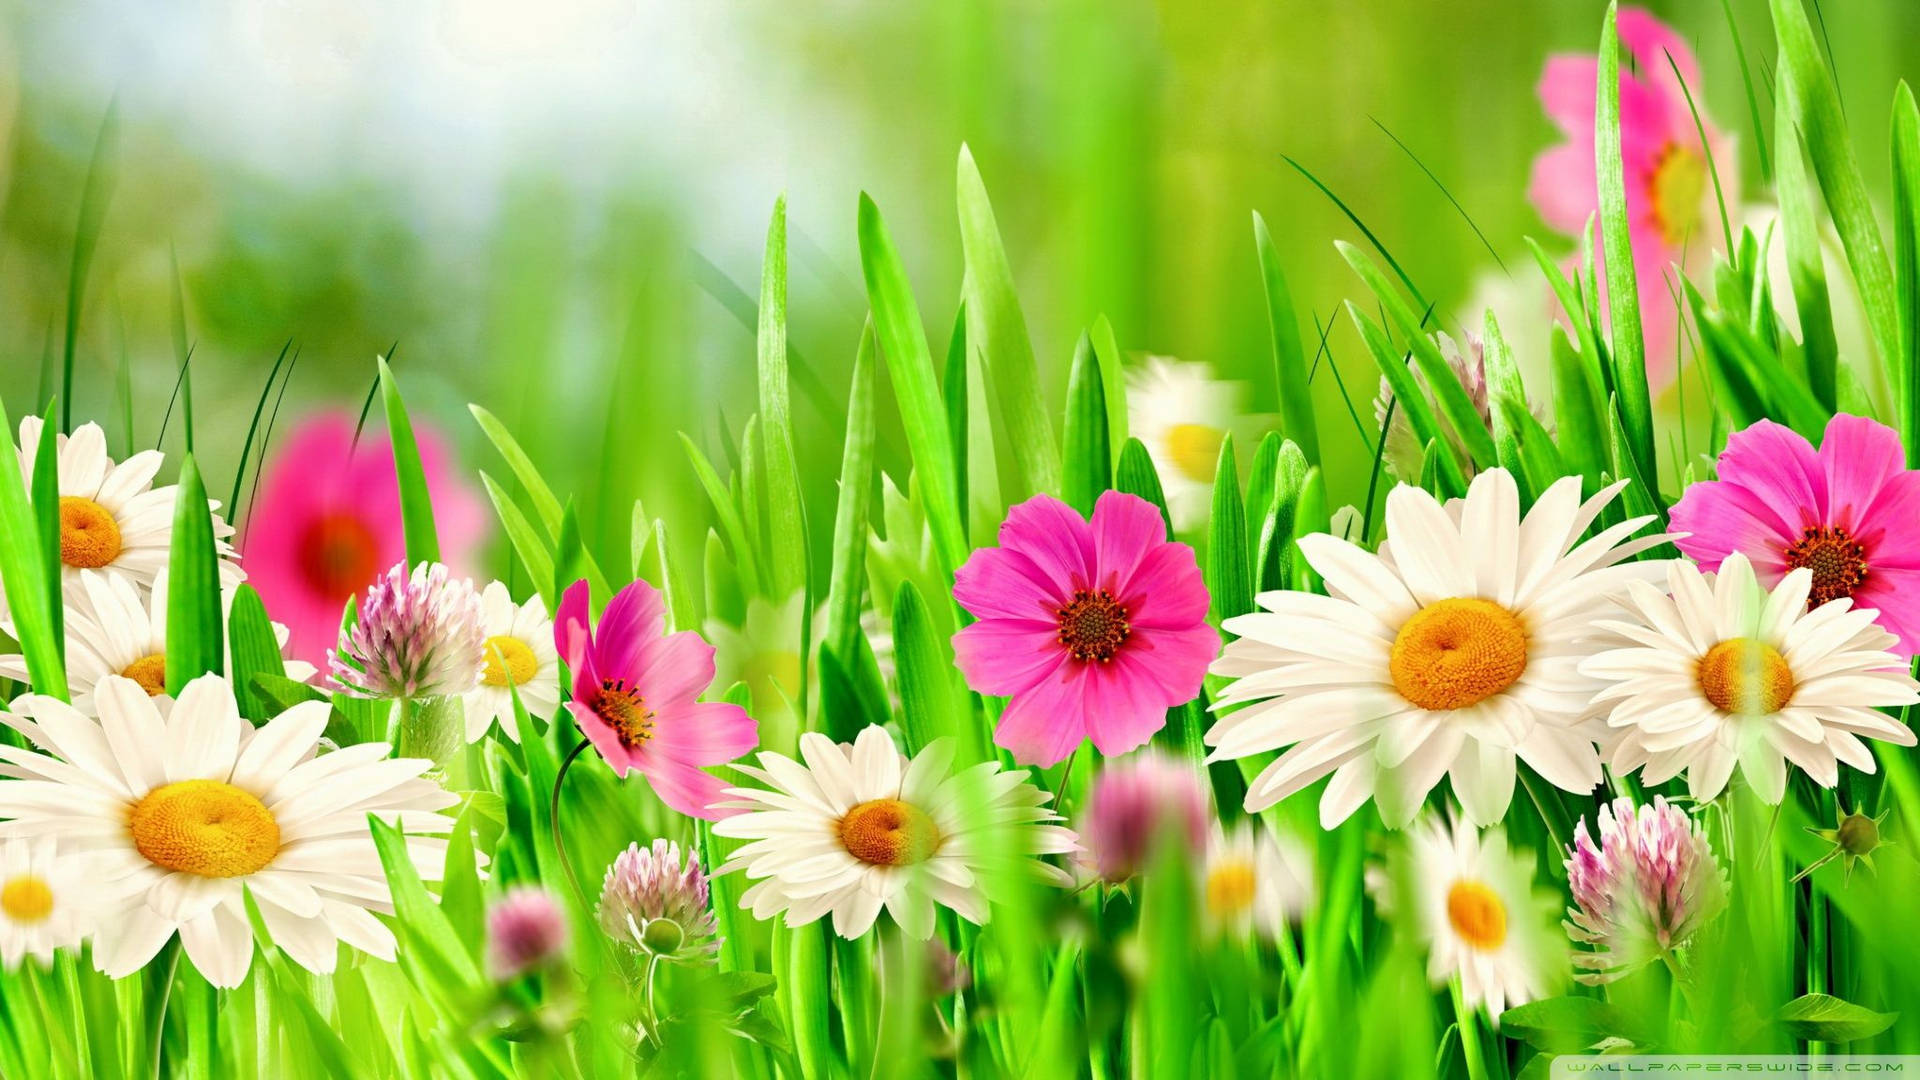 Celebrate Easter with a bouquet of colorful flowers Wallpaper